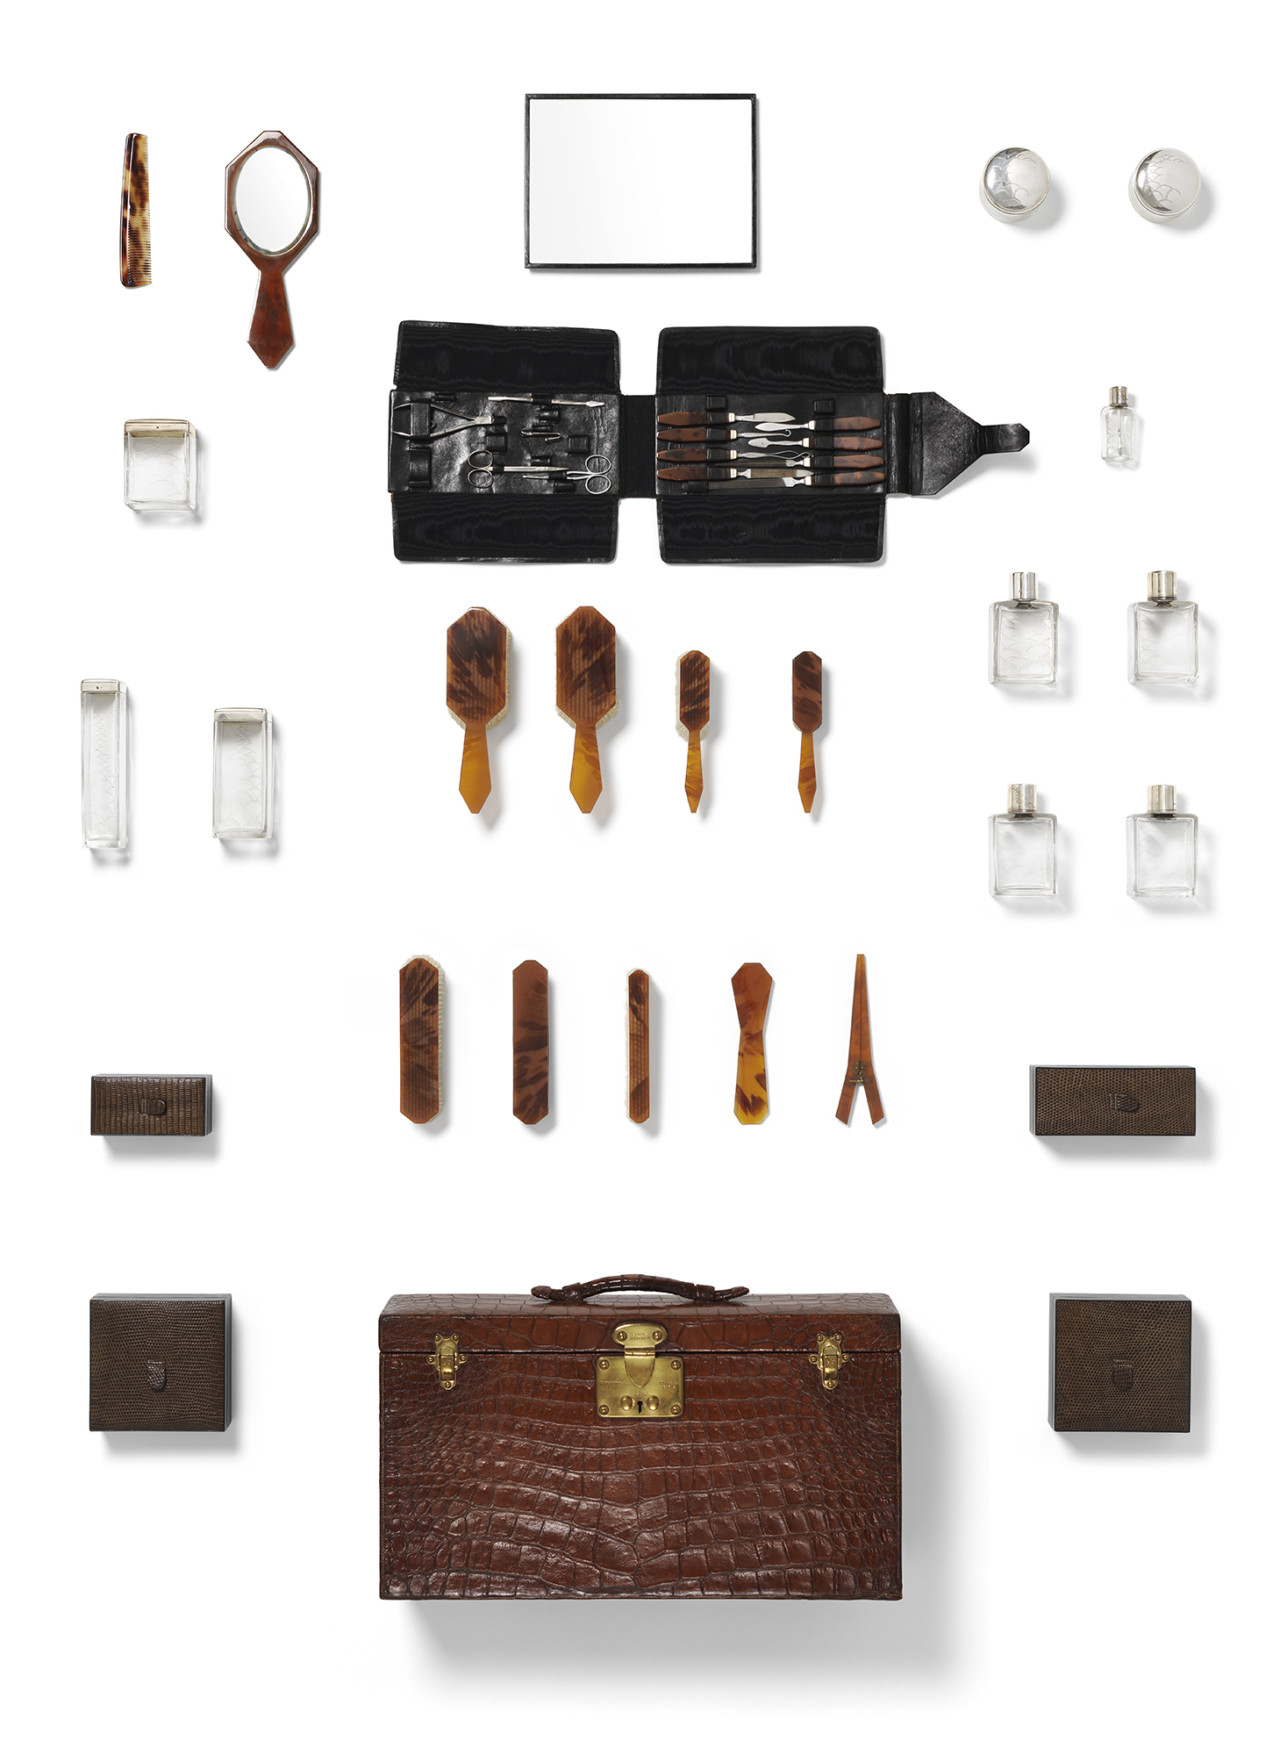 Cabinet of Wonders: The Gaston-Louis Vuitton Collection by Louis Vuitton